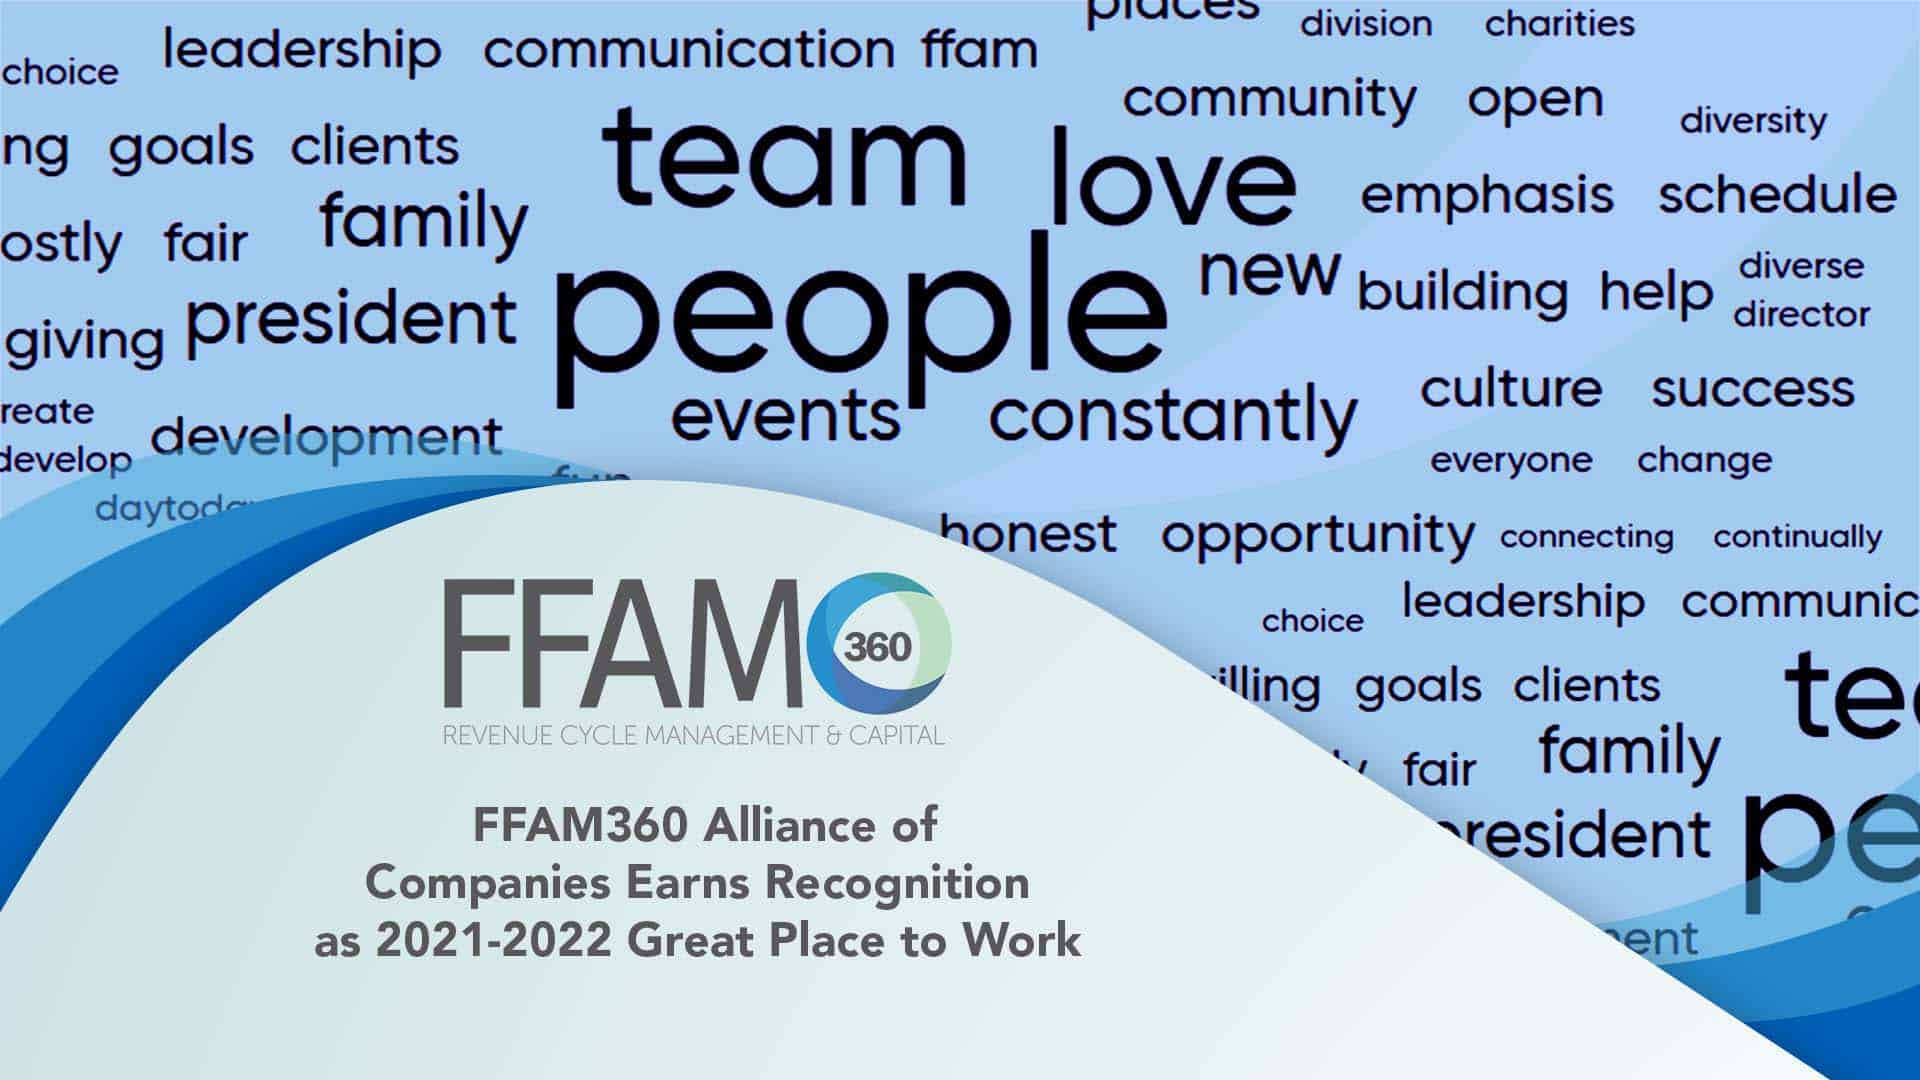 Word cloud of positive words from employee surveys. Largest words are team, love, and people.